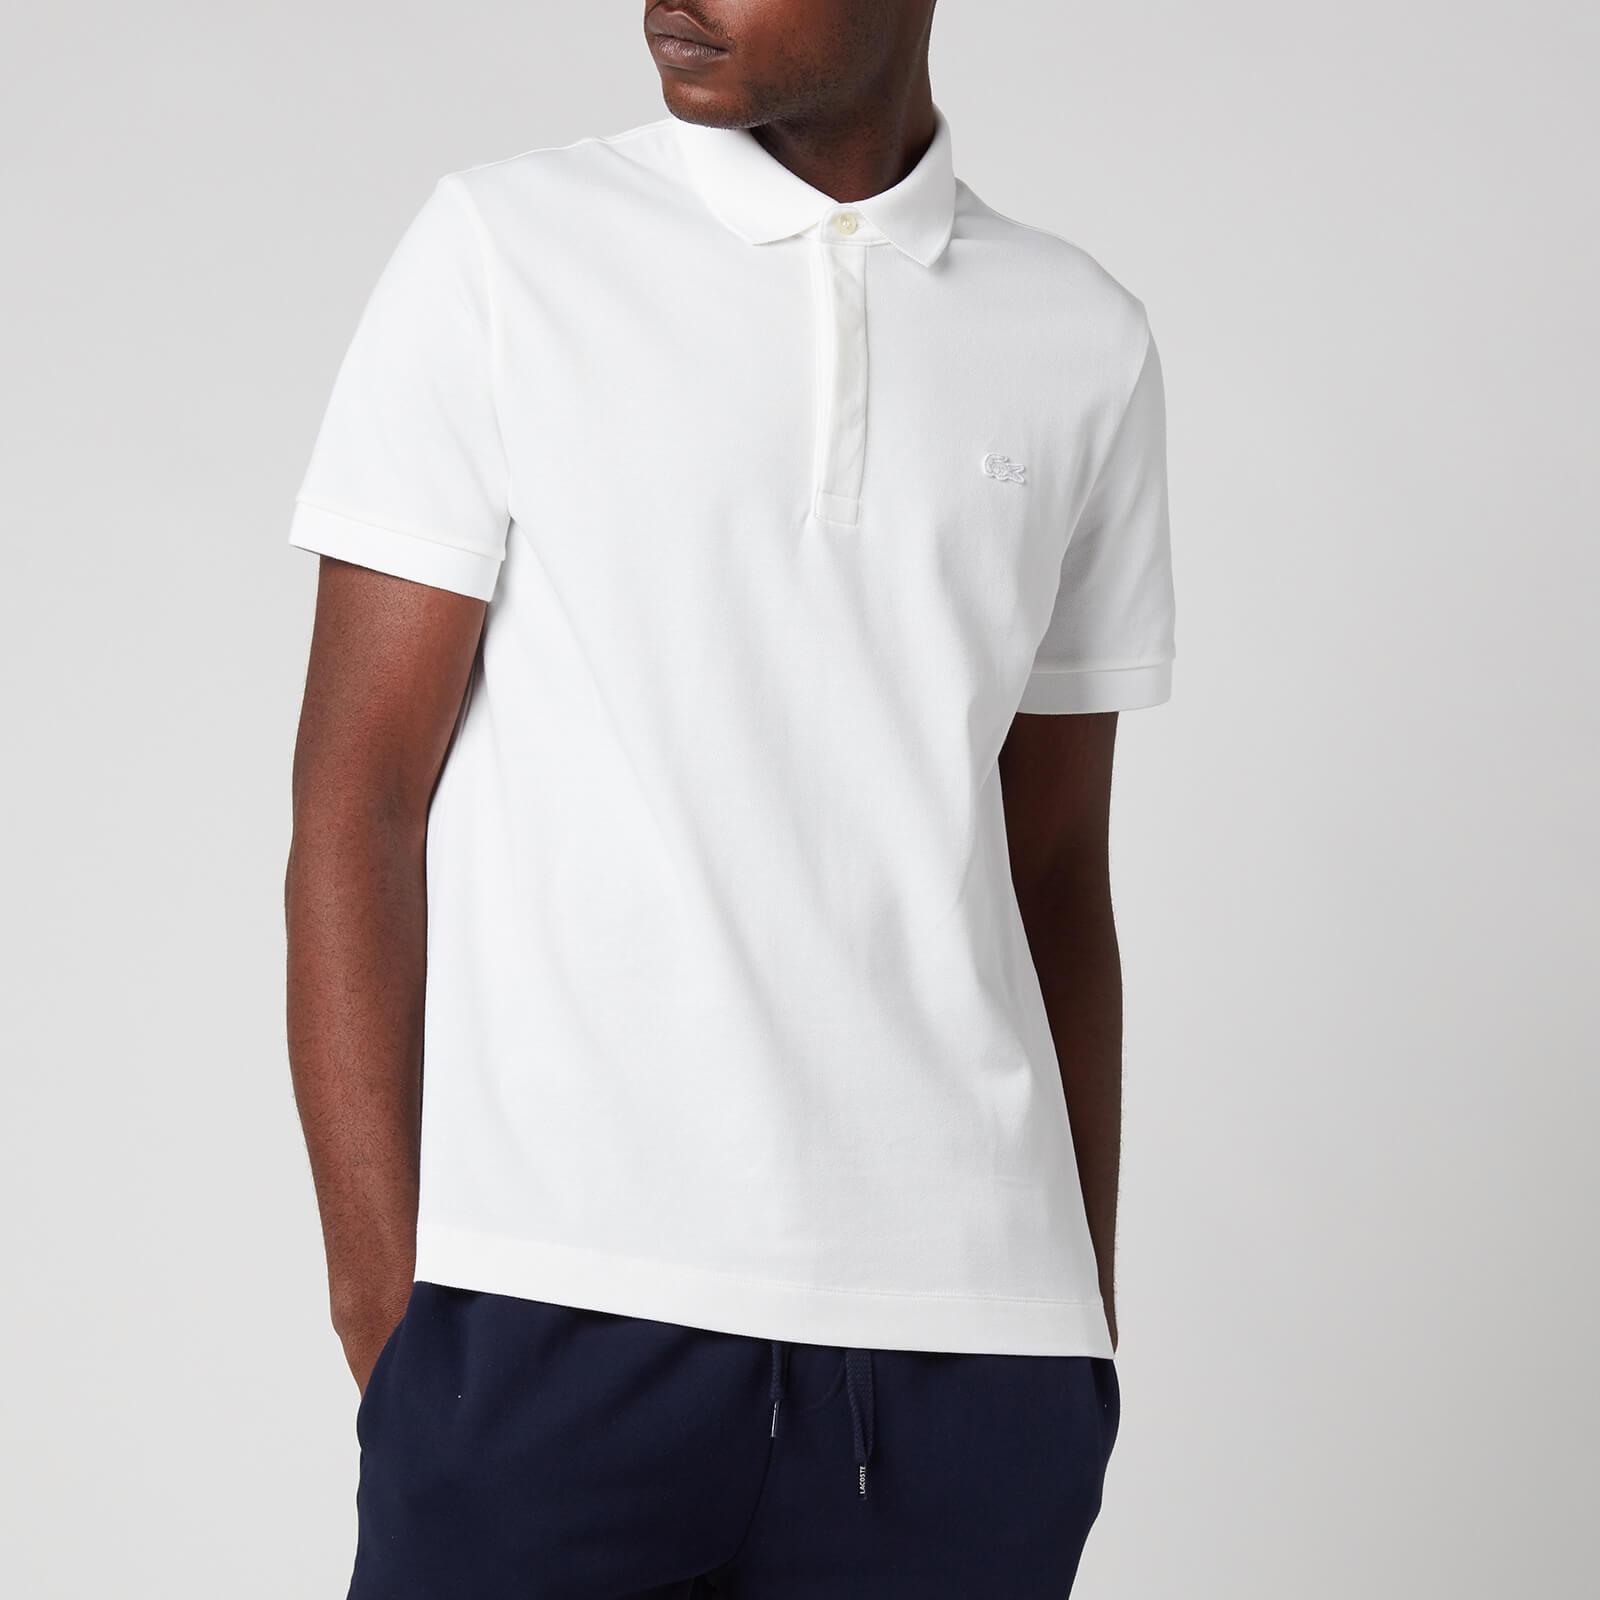 Lacoste Cotton Regular Fit Paris Polo Shirt in White for Men - Save 14% |  Lyst